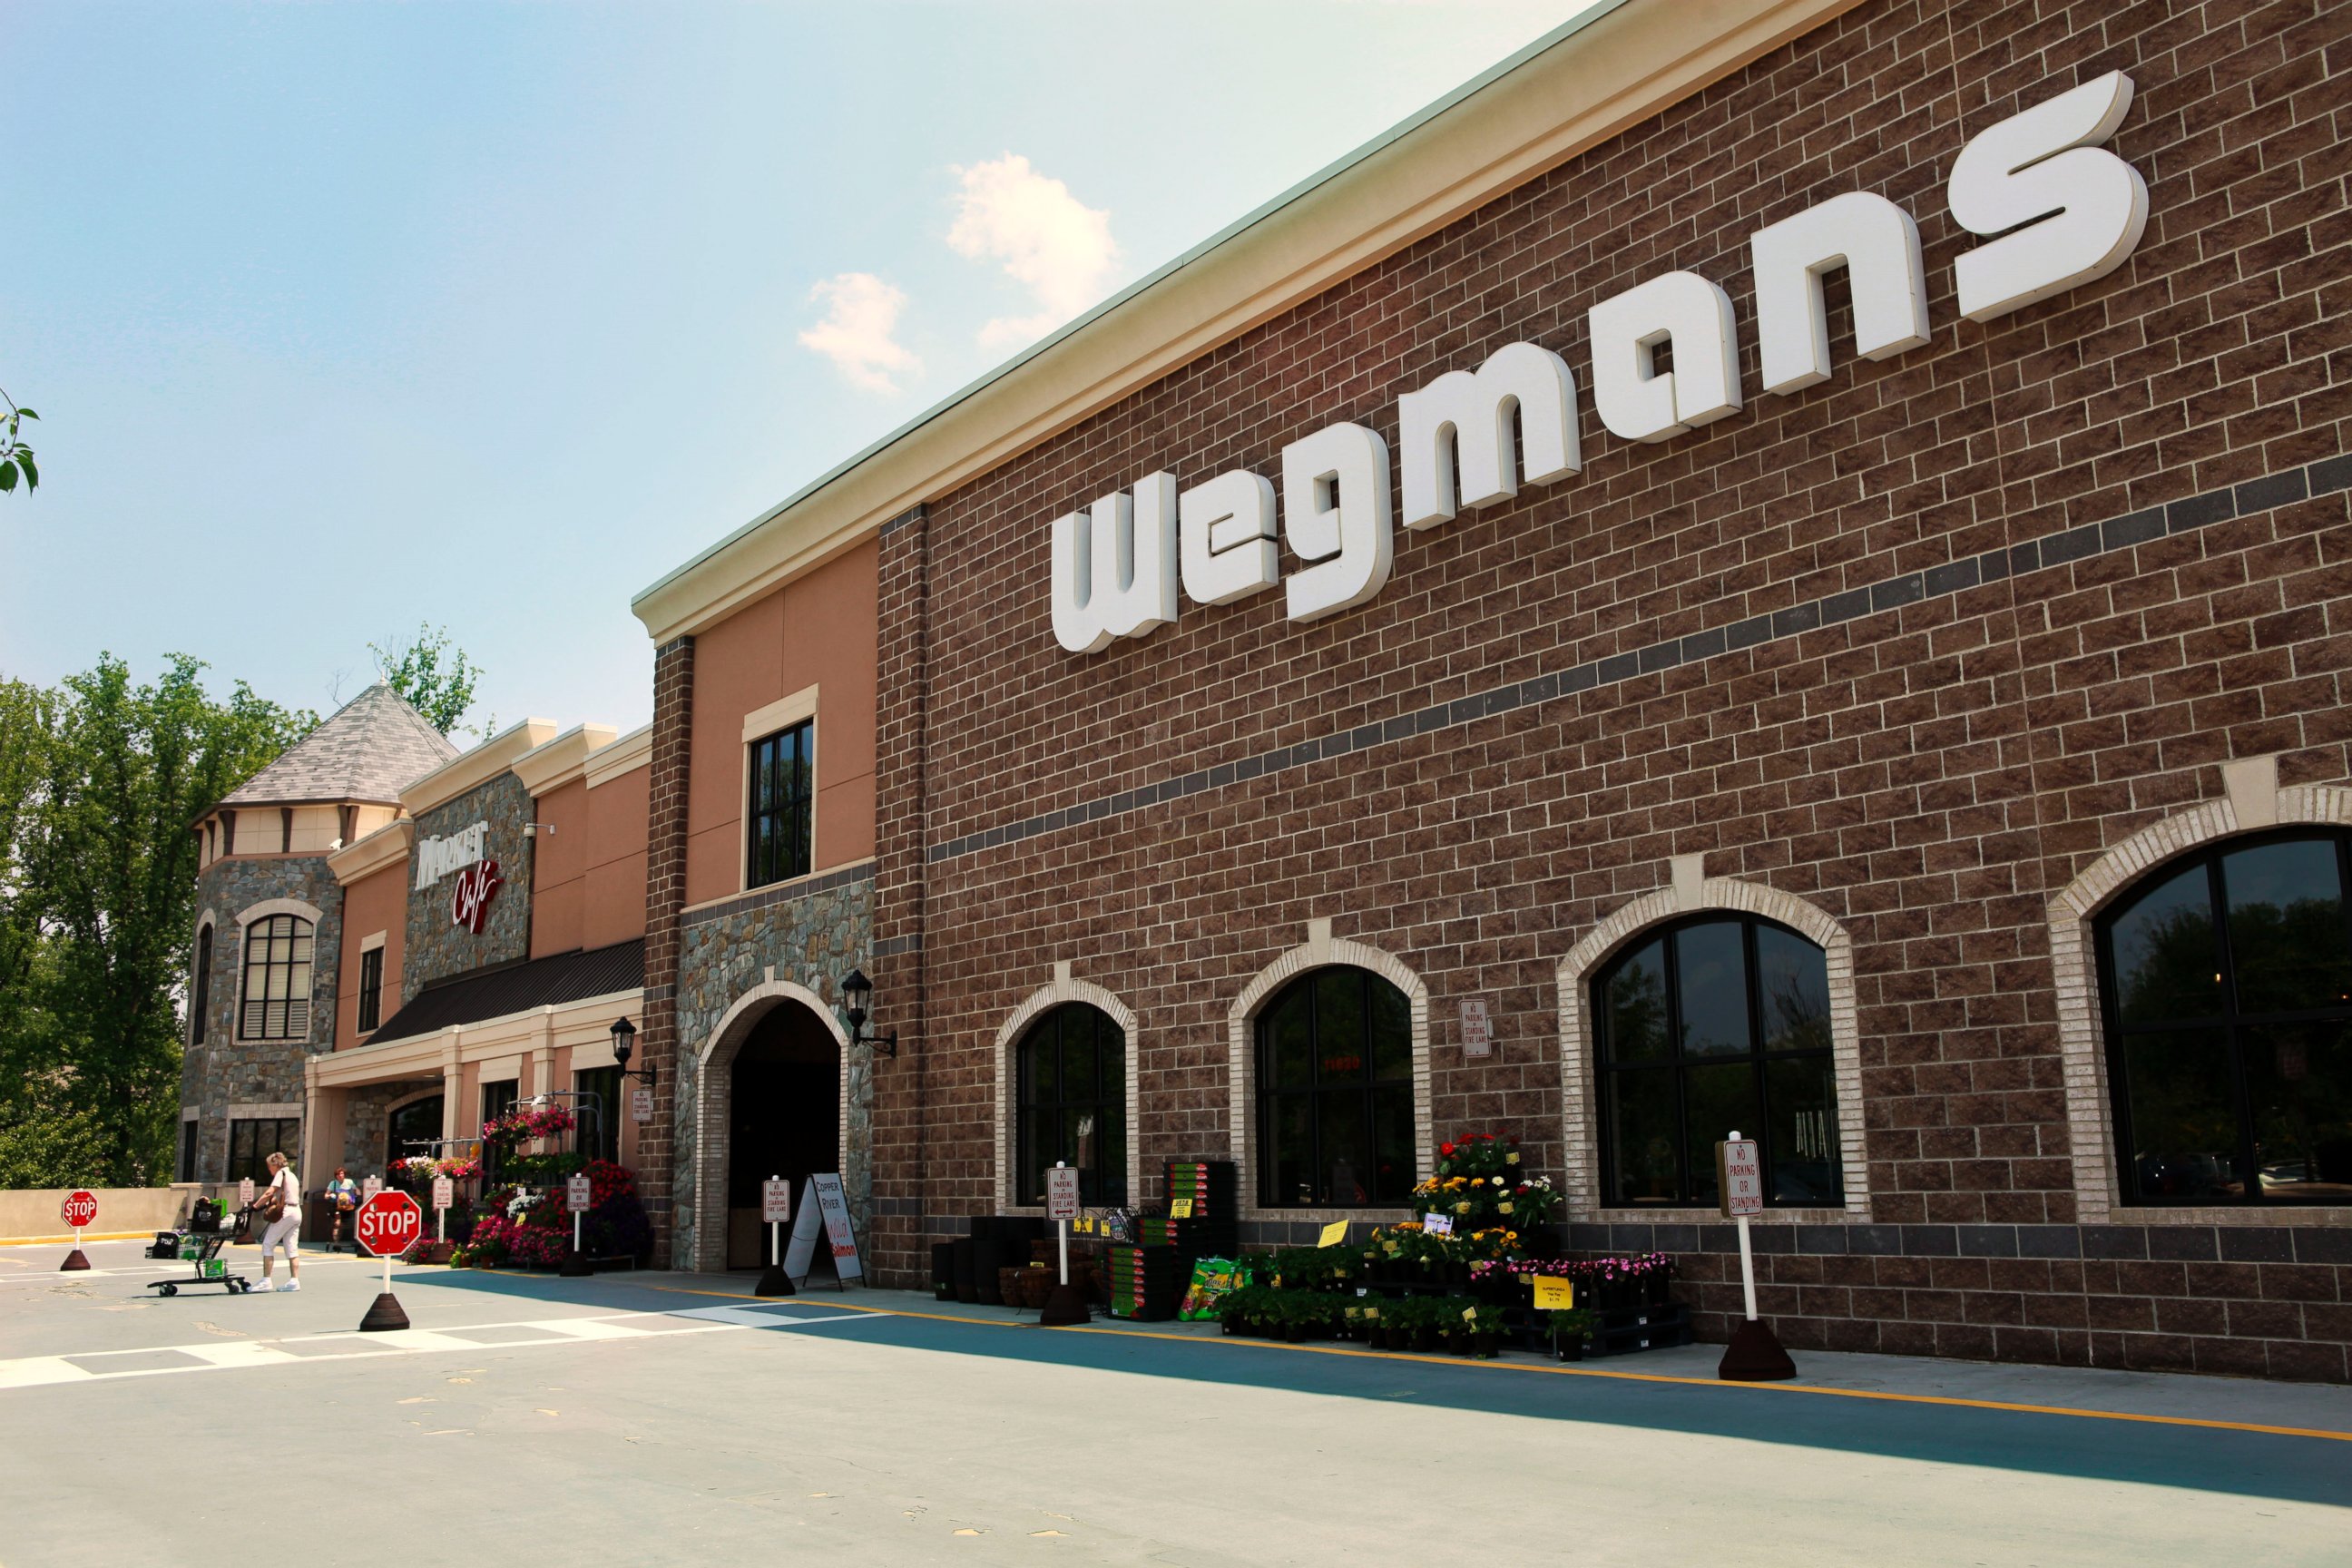 PHOTO: A Wegmans grocery store is pictured in Fairfax, Va. on May 27, 2010.